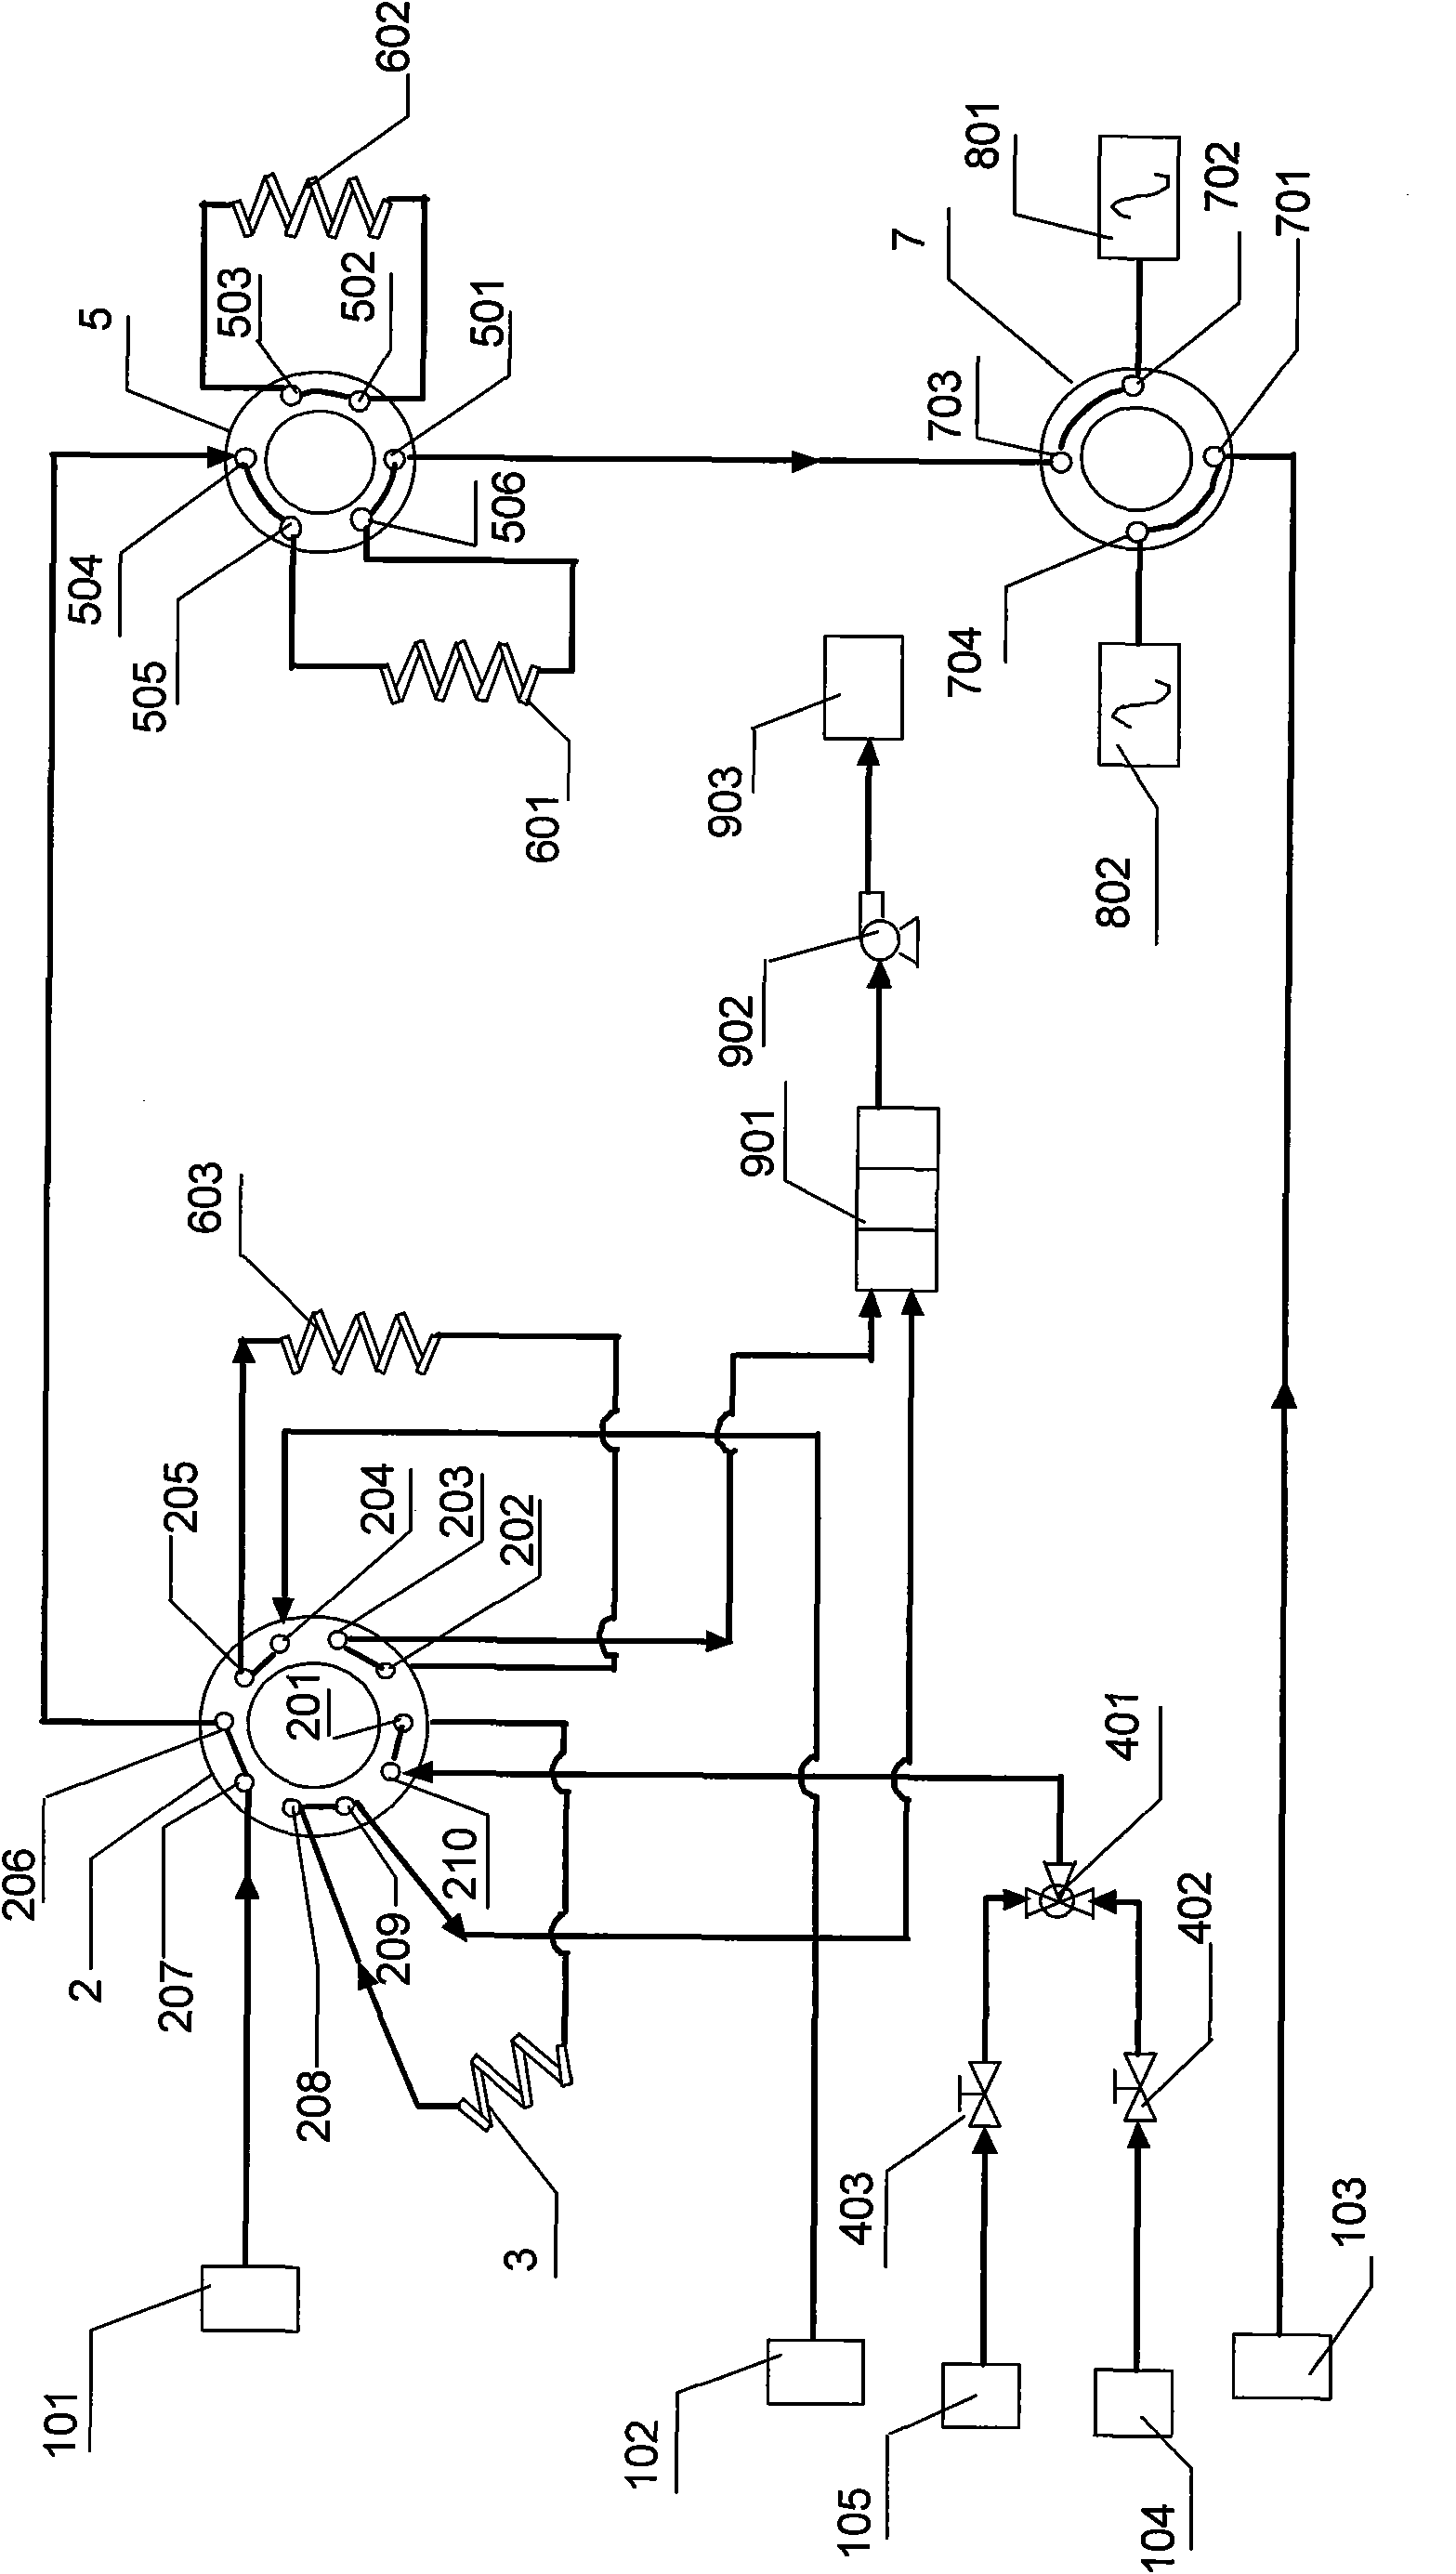 Device and method for detecting impurities in corrosive gas